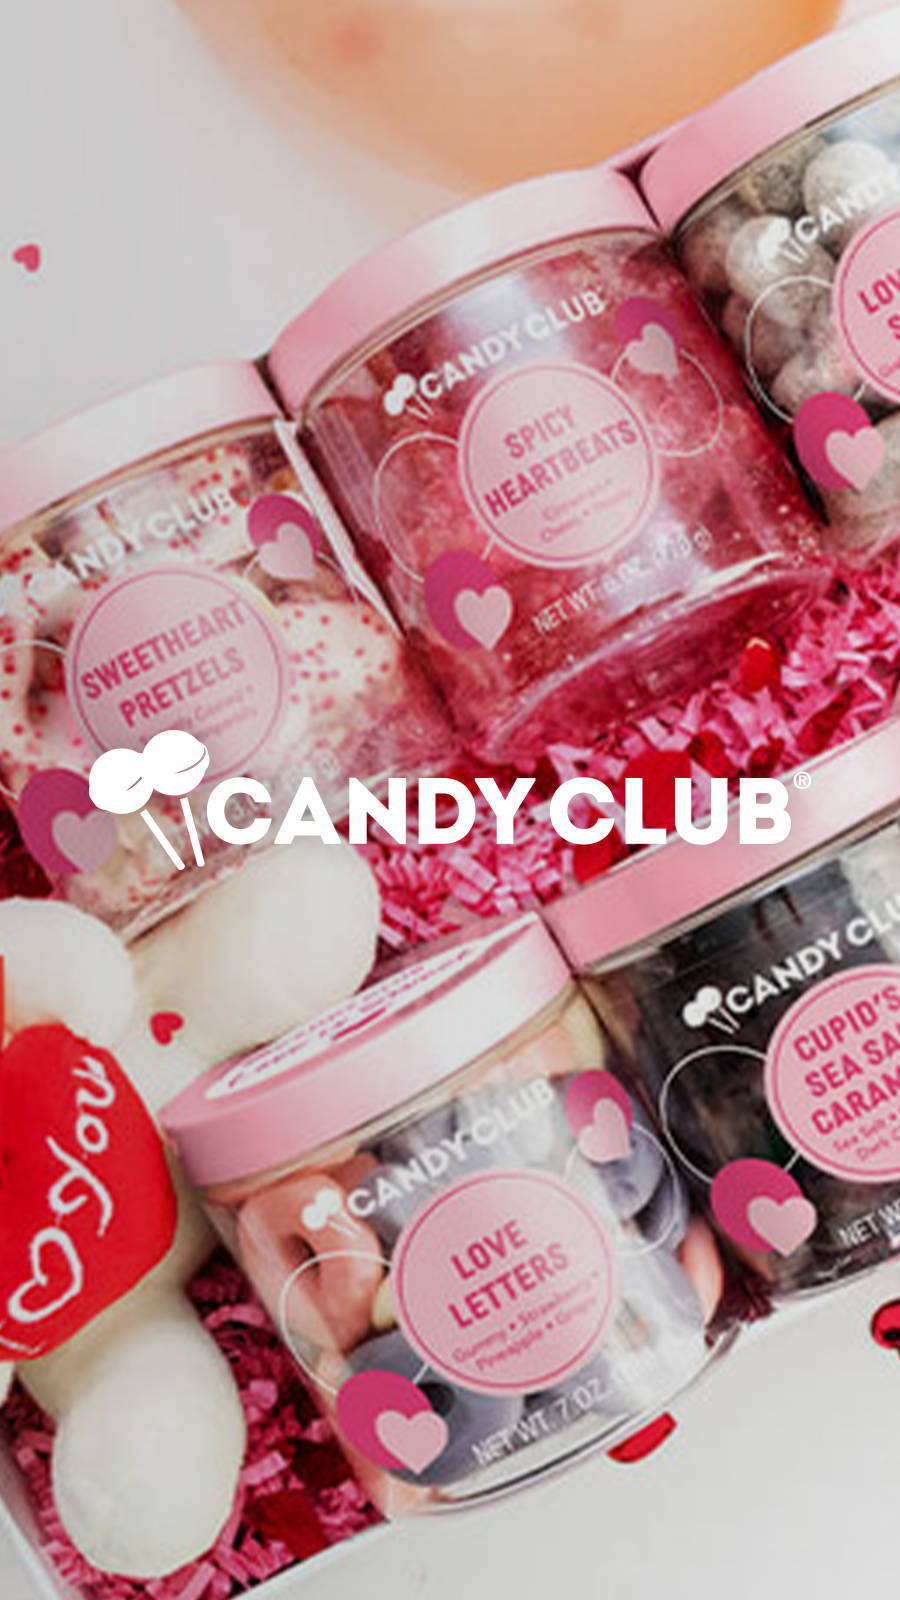 Assortment of Candy Club candy